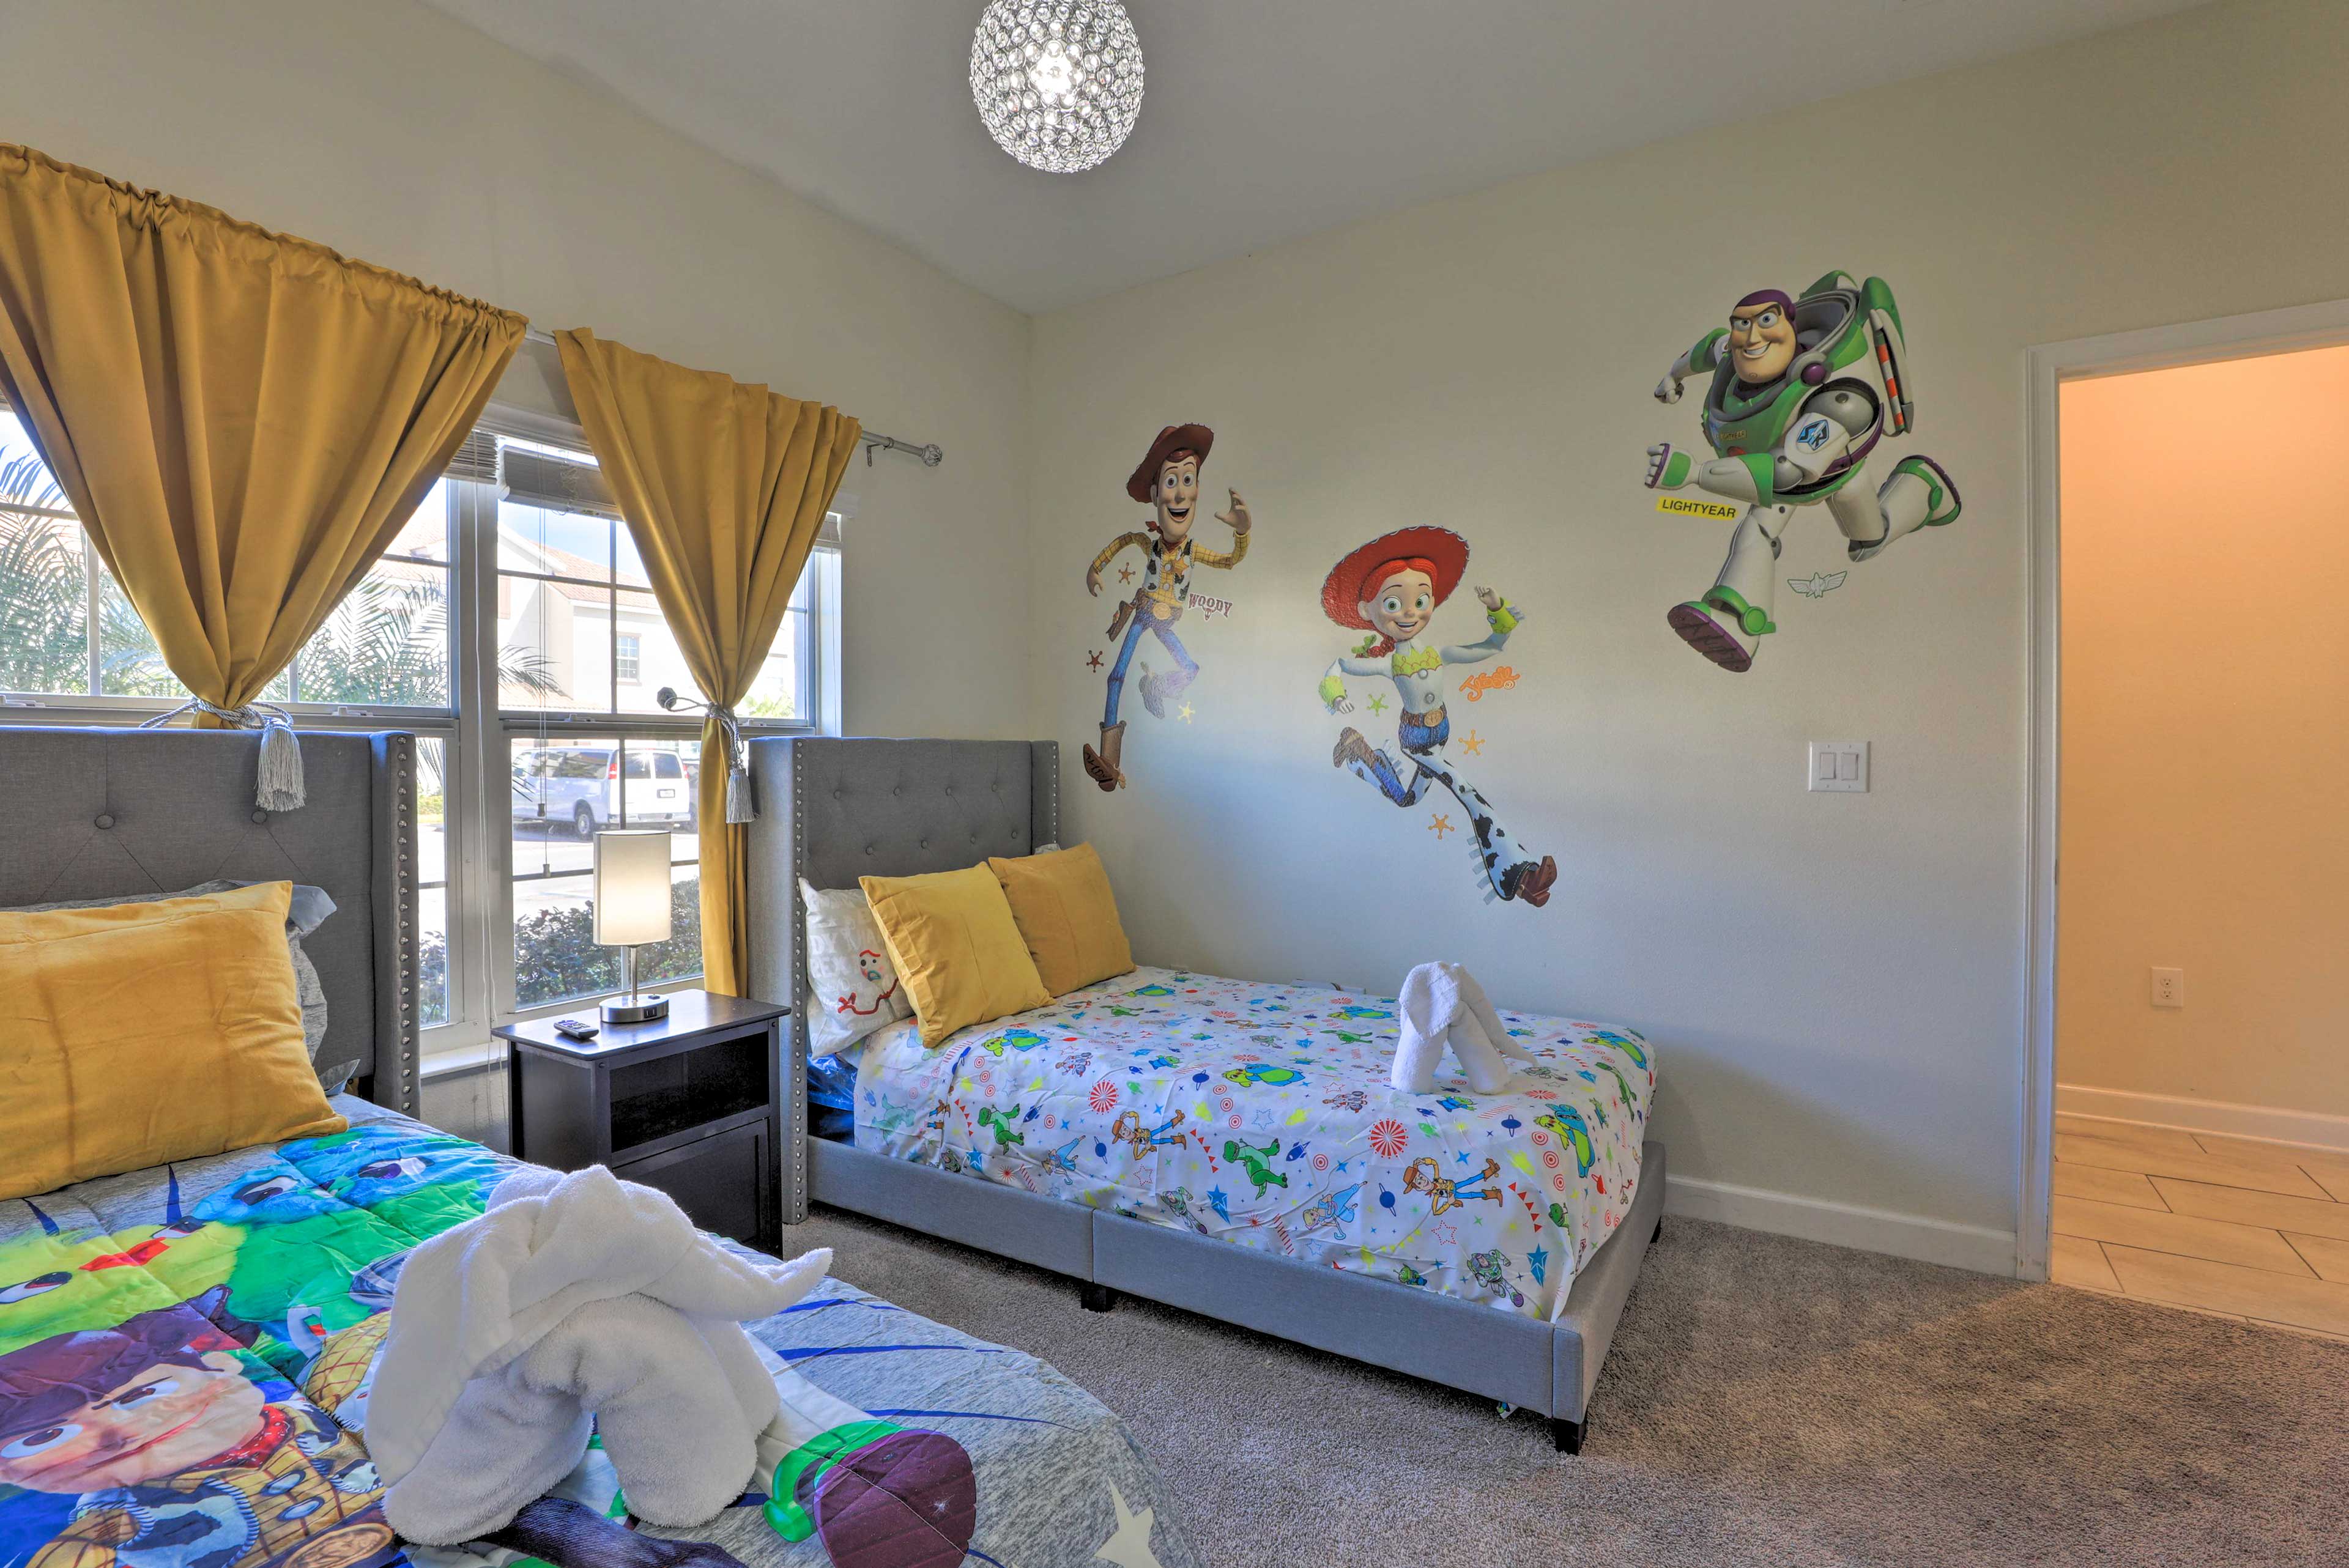 Bedroom 5 (Toy Story Room)